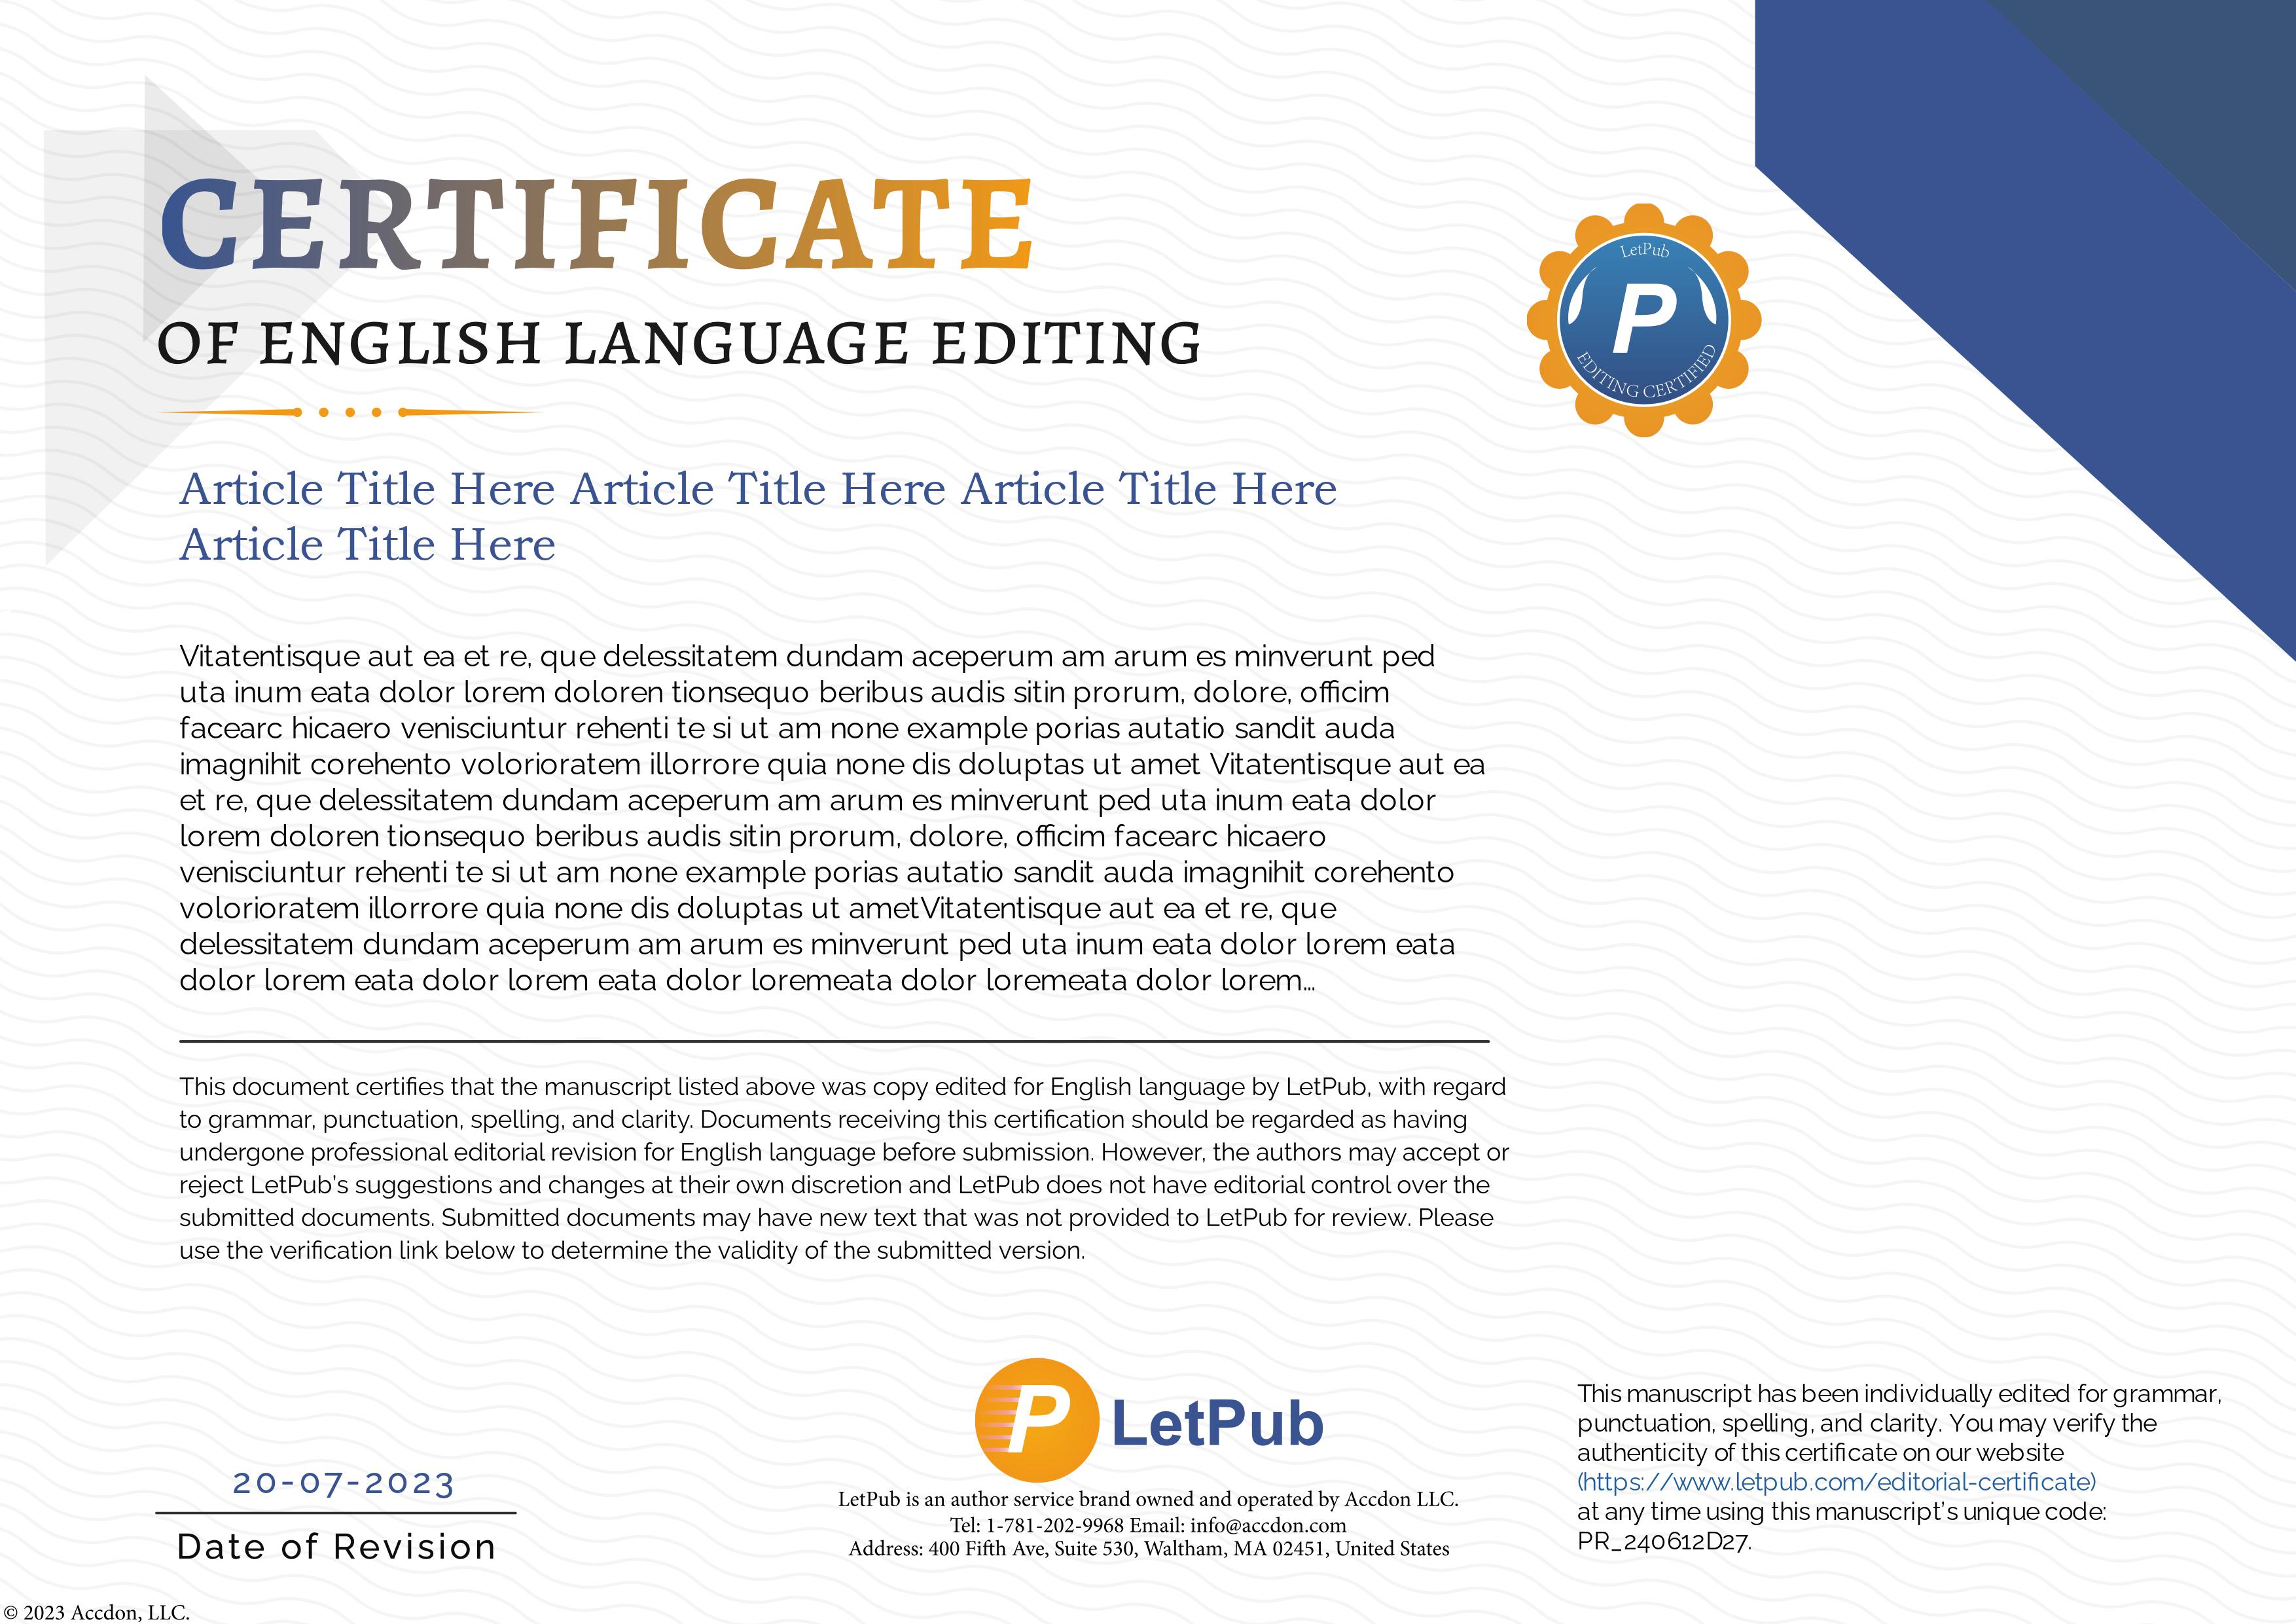 LetPub introduces new editorial certificate and certificate verification